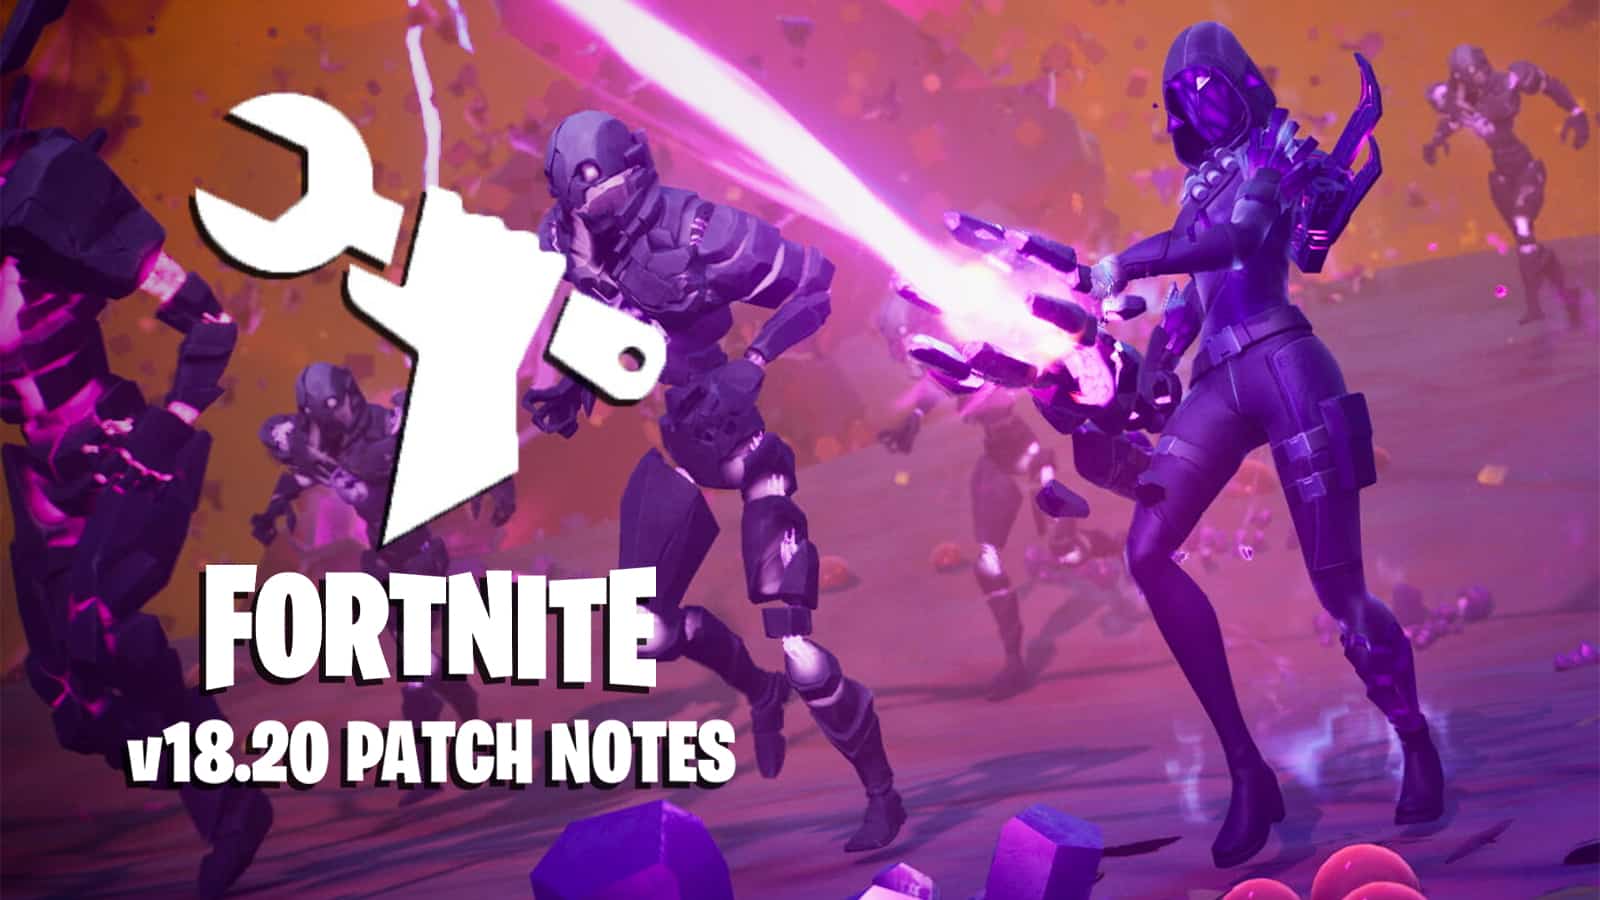 Fortnite update 18.20 patch notes